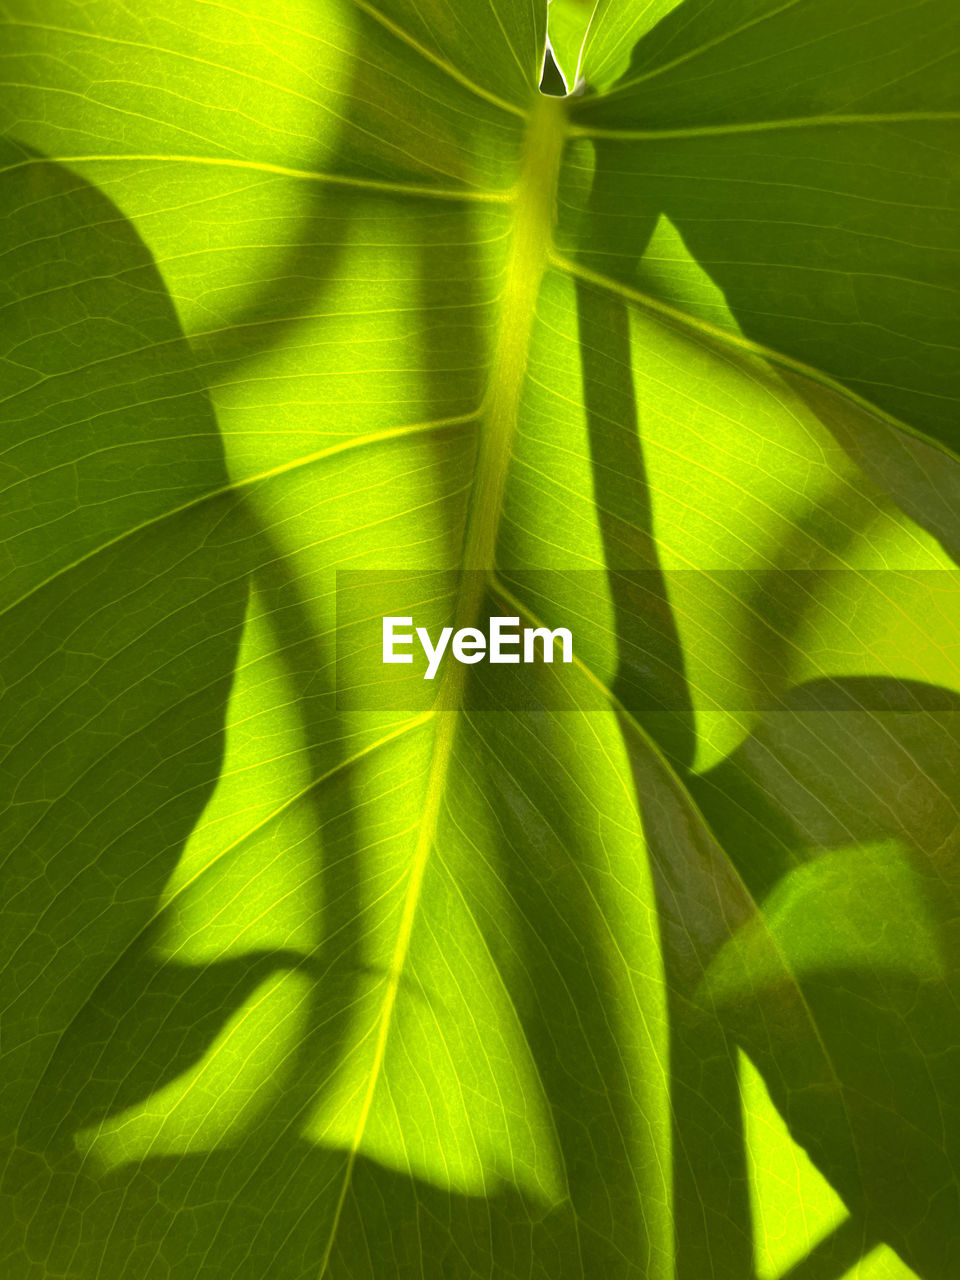 green, leaf, plant part, yellow, sunlight, plant, nature, no people, backgrounds, flower, beauty in nature, growth, tree, close-up, full frame, palm leaf, leaf vein, palm tree, plant stem, tropical climate, pattern, grass, outdoors, shadow, macro photography, day, environment, textured, vibrant color, freshness